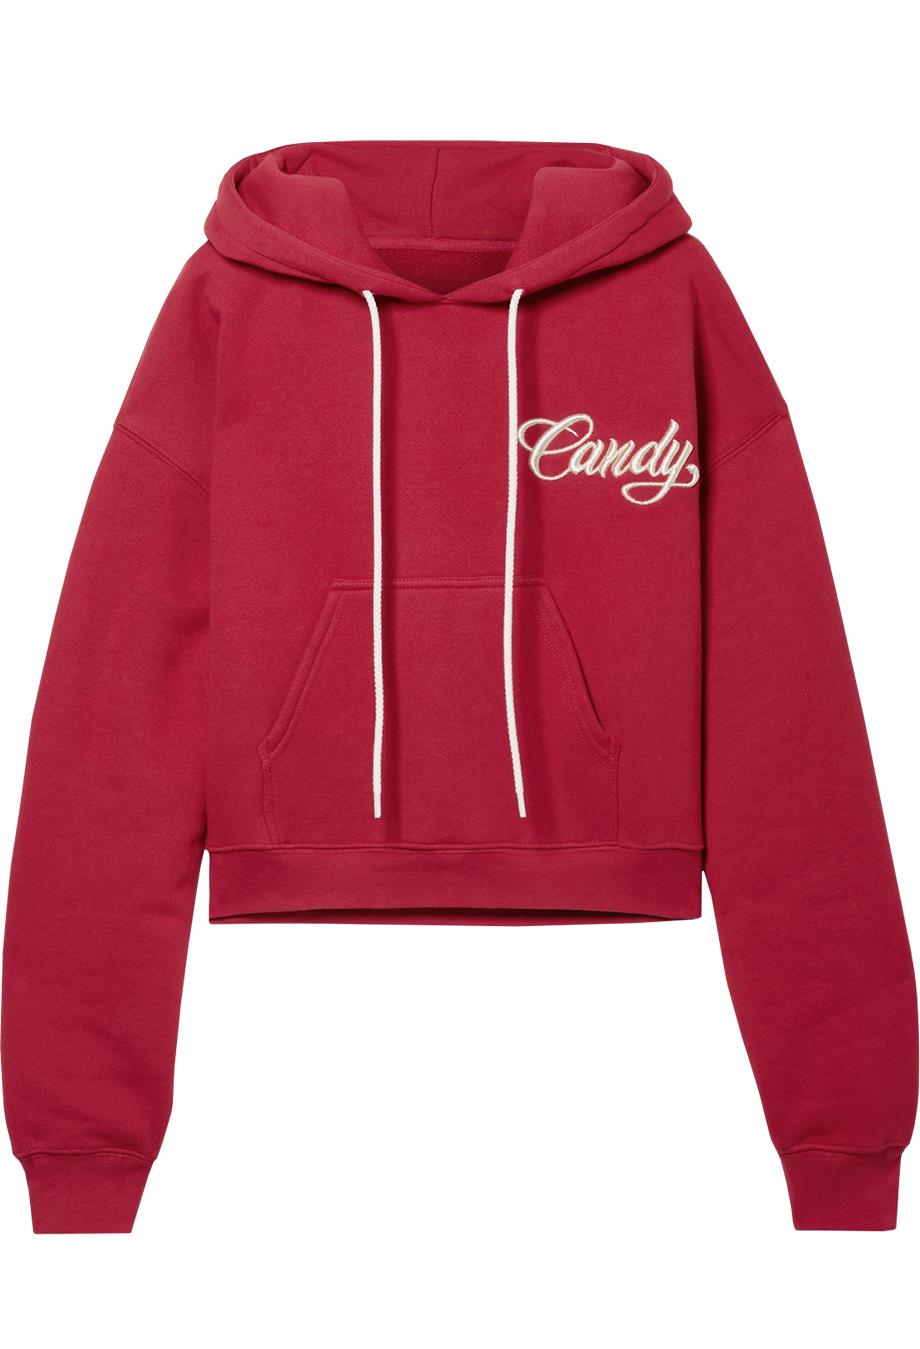 ADAPTATION CROPPED EMBROIDERED COTTON JERSEY HOODIE LARGE